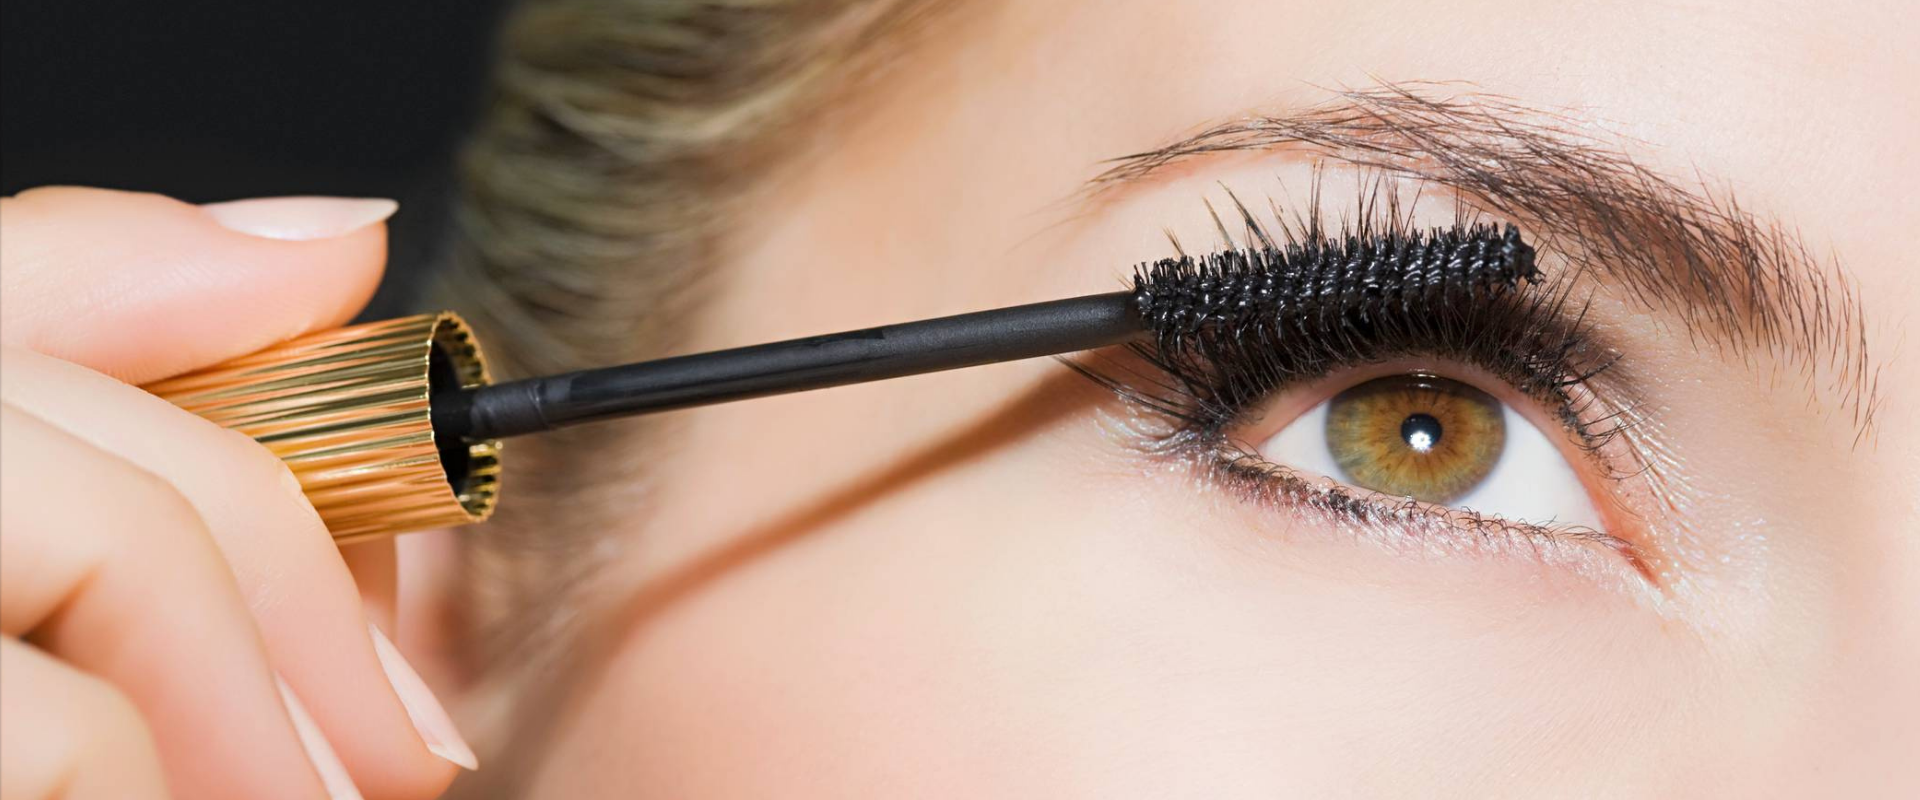 The 6 Best Mascaras of the Moment - Mascara for Volume ...